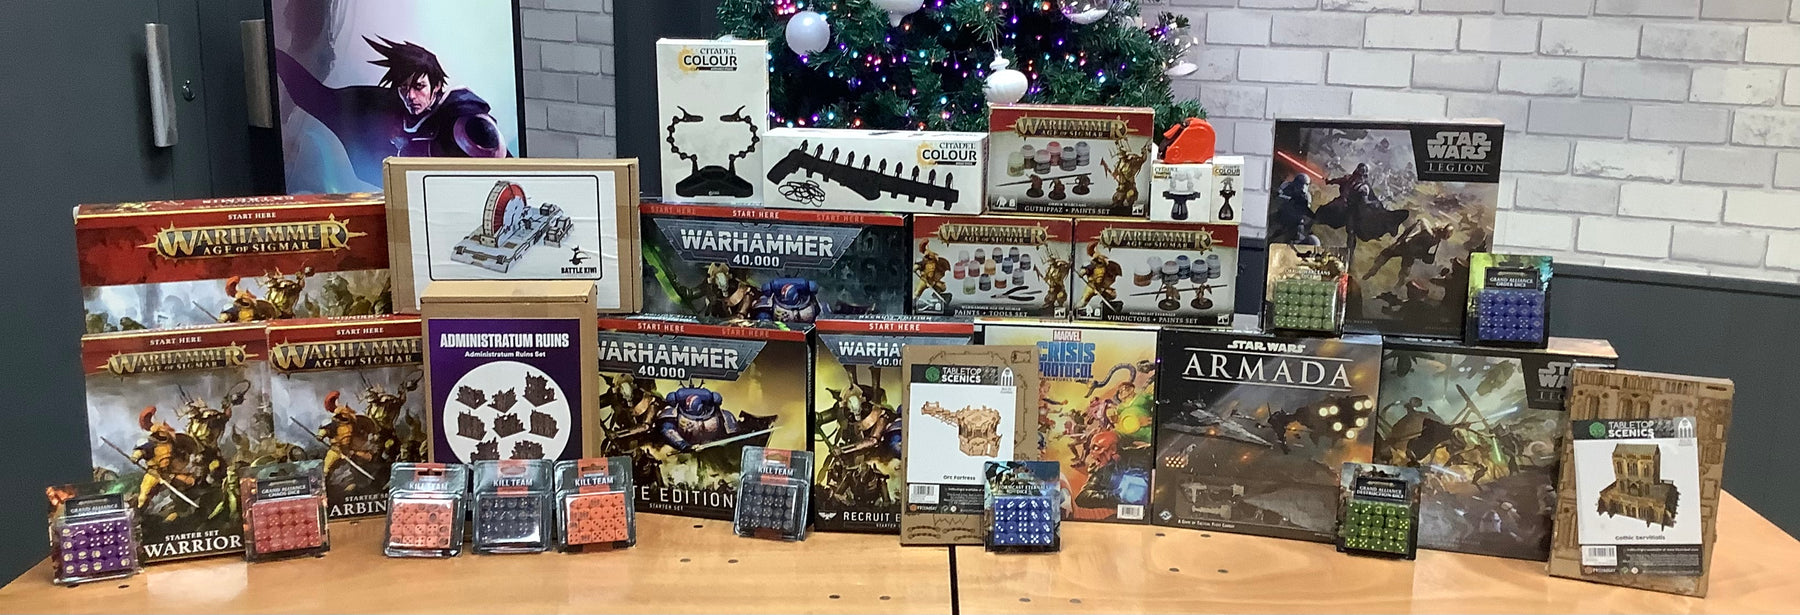 Wargaming Gifts to put on your Christmas Shopping List